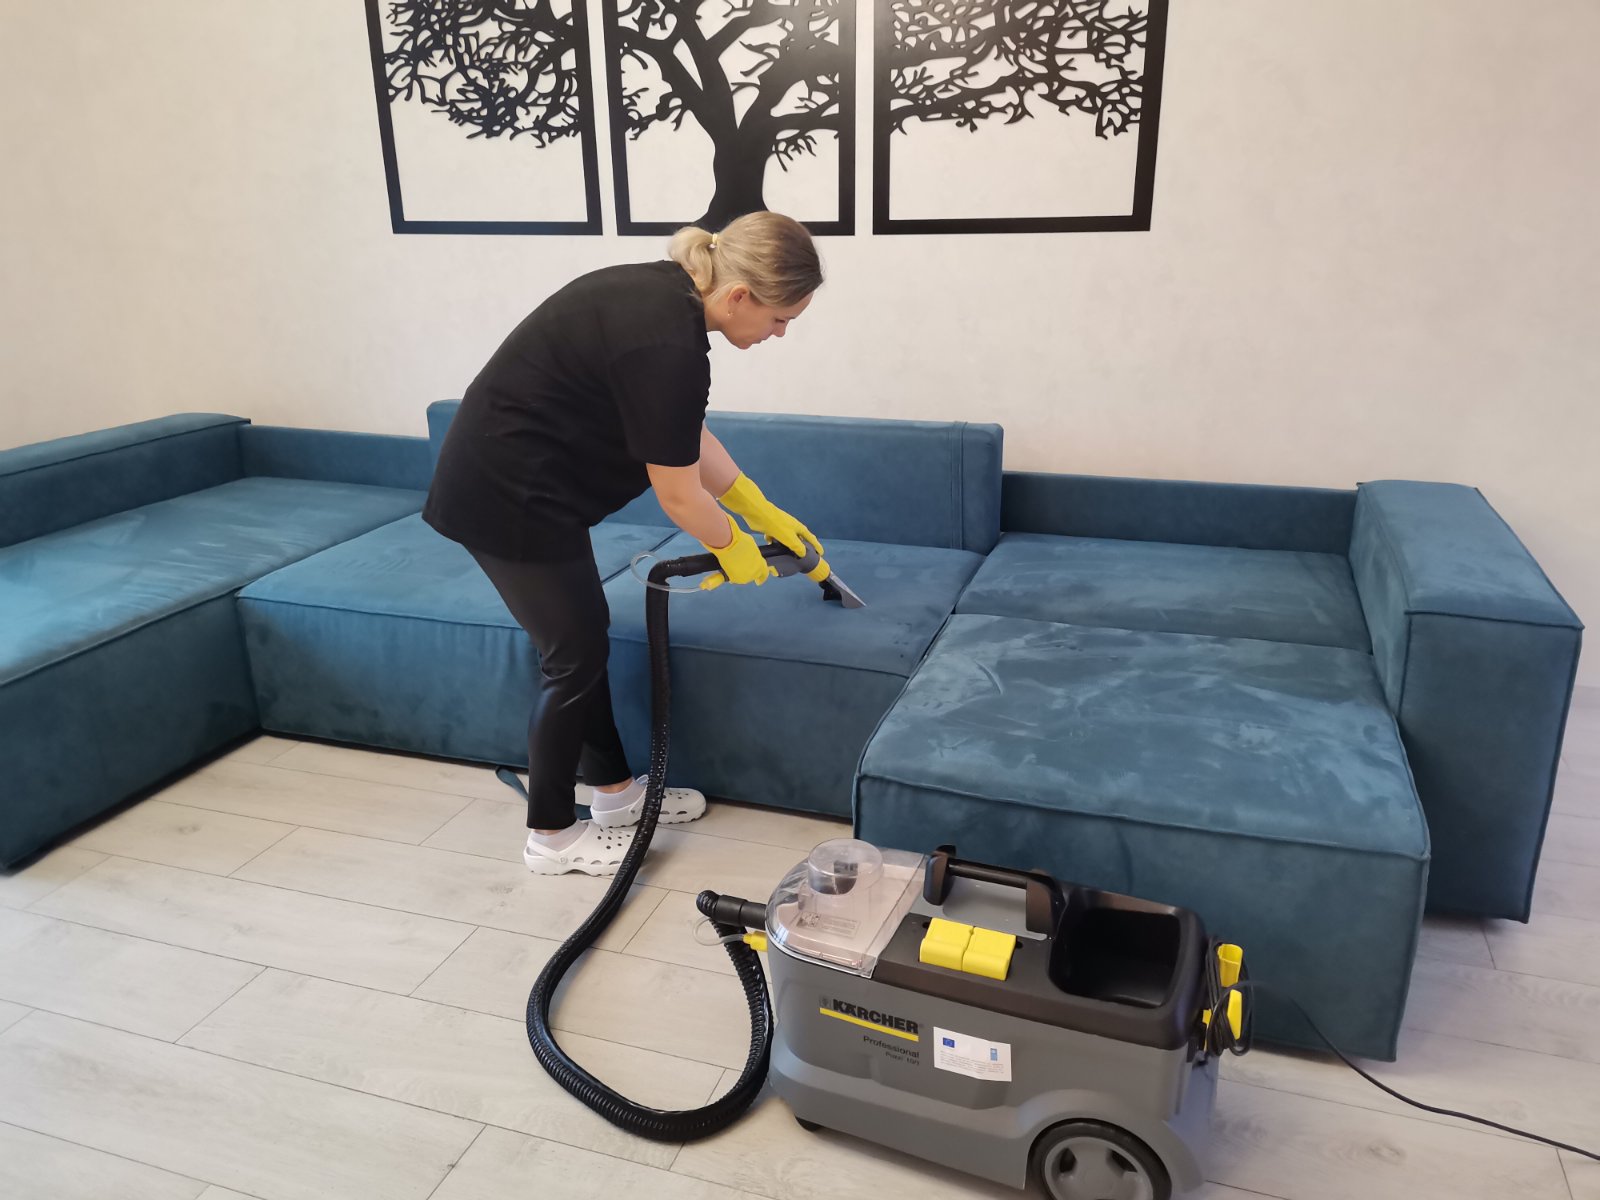 A woman cleaning with a vacuum cleaner